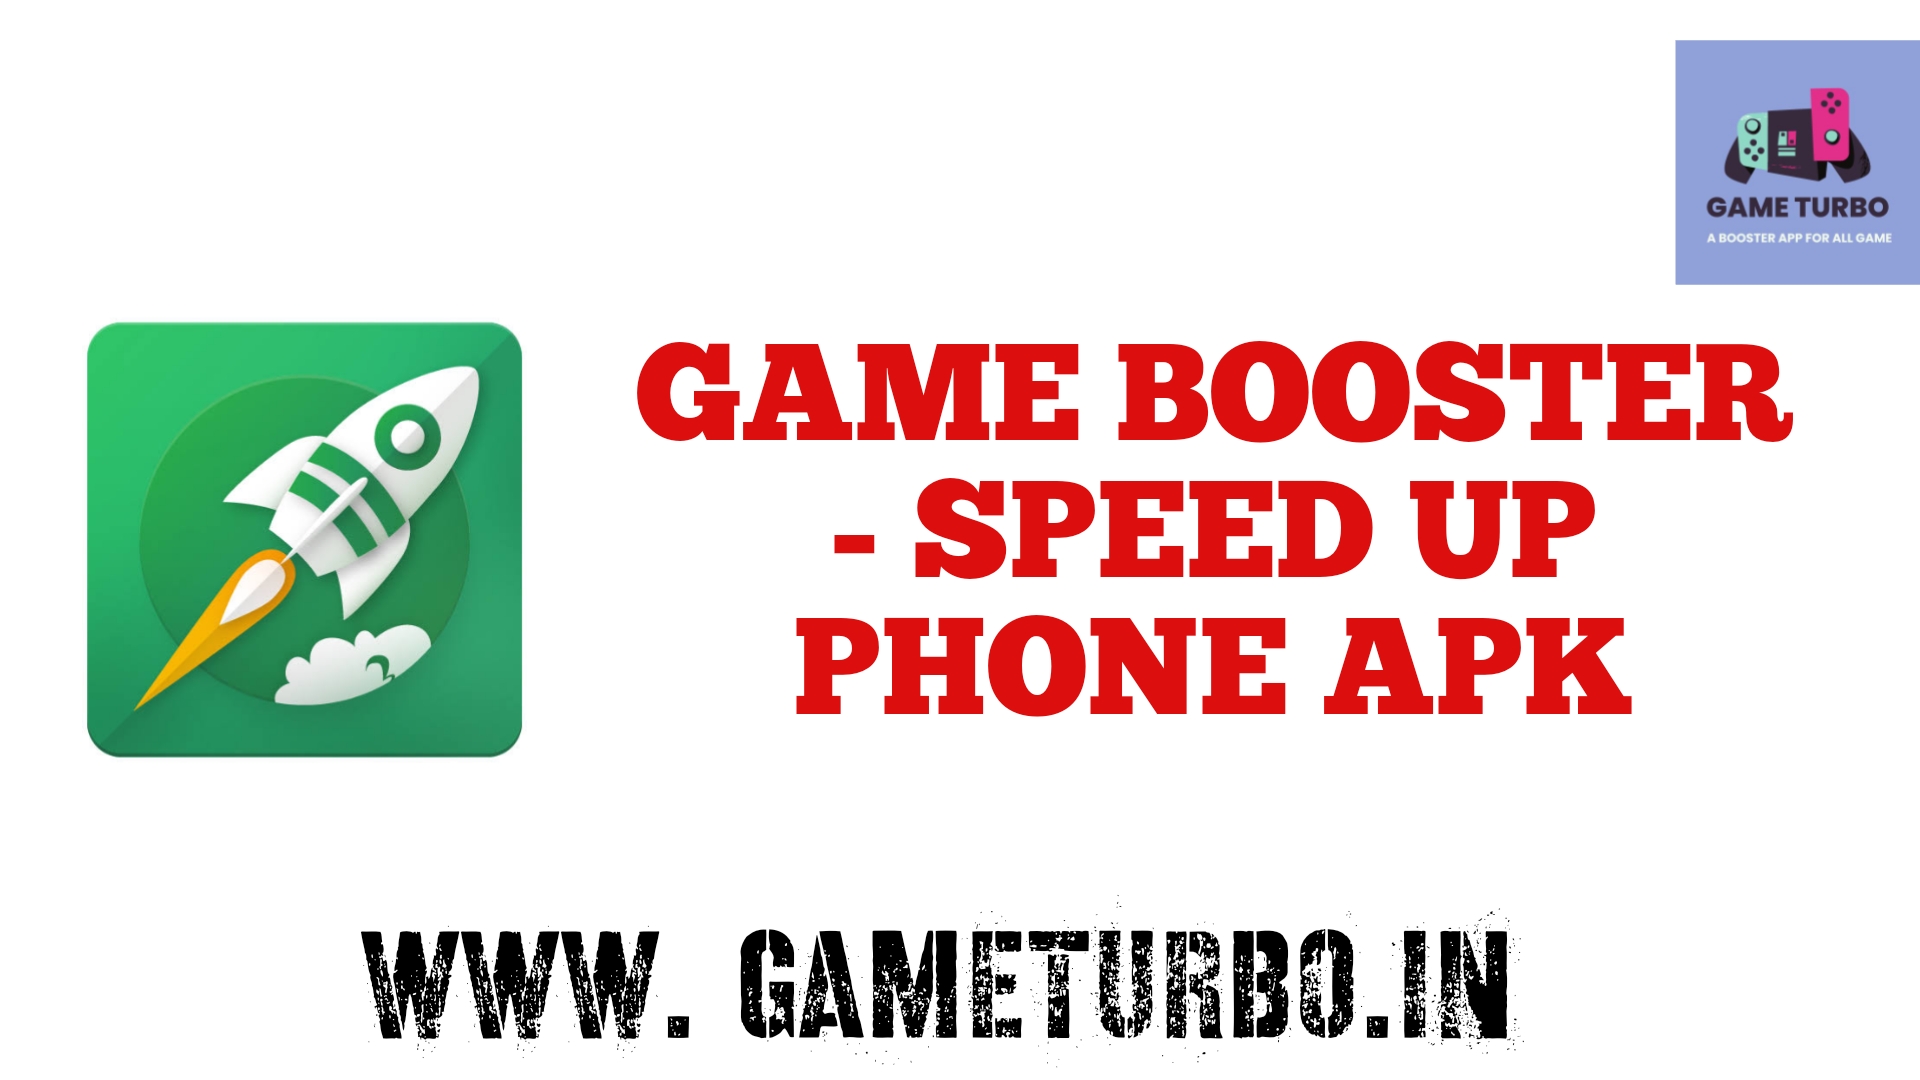 GAME BOOSTER SPEED UP PHONE APK DOWNLOAD 2023